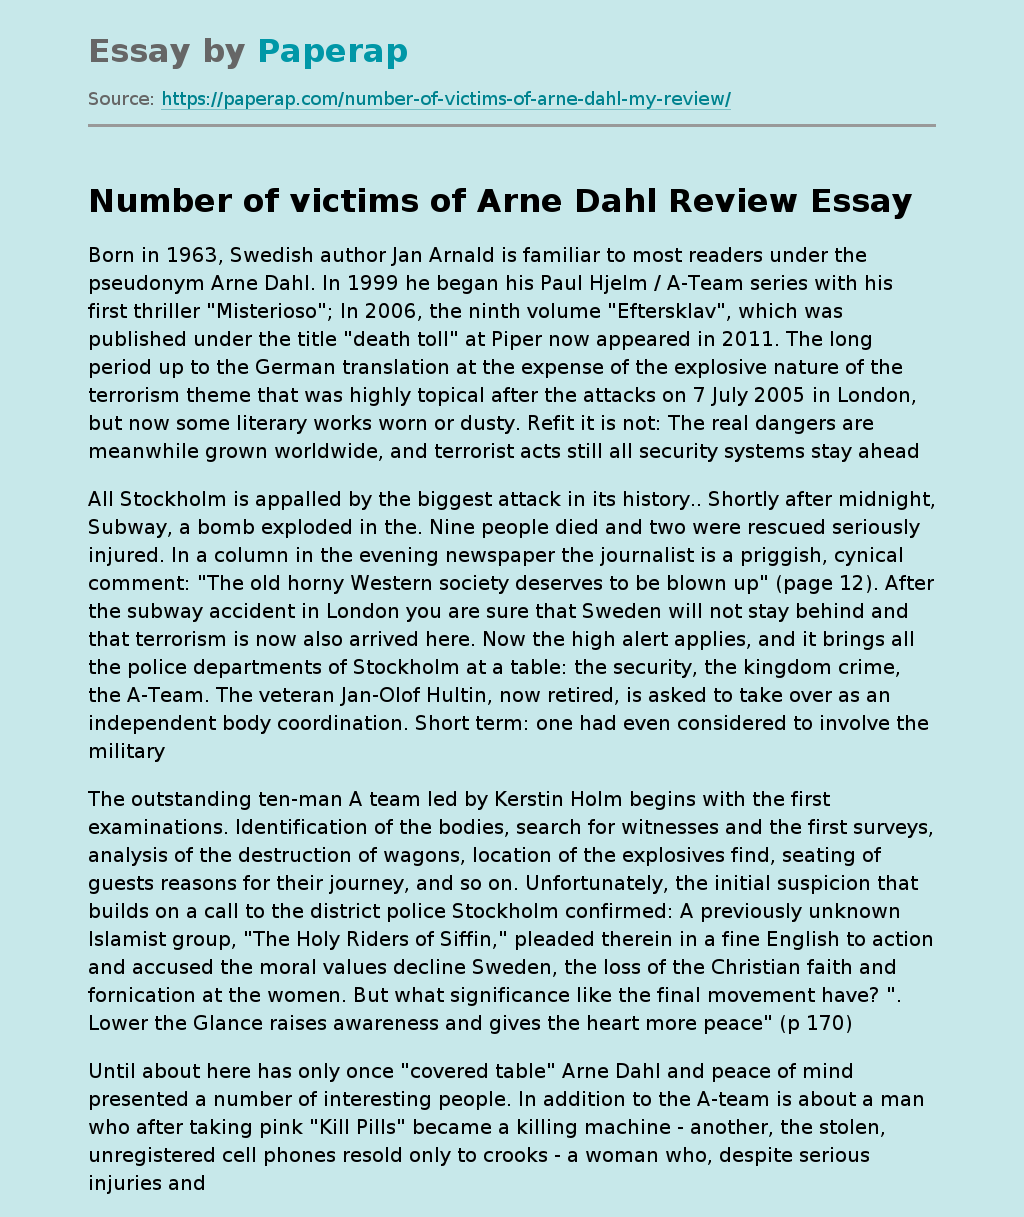 “Number of Victims” of Arne Dahl